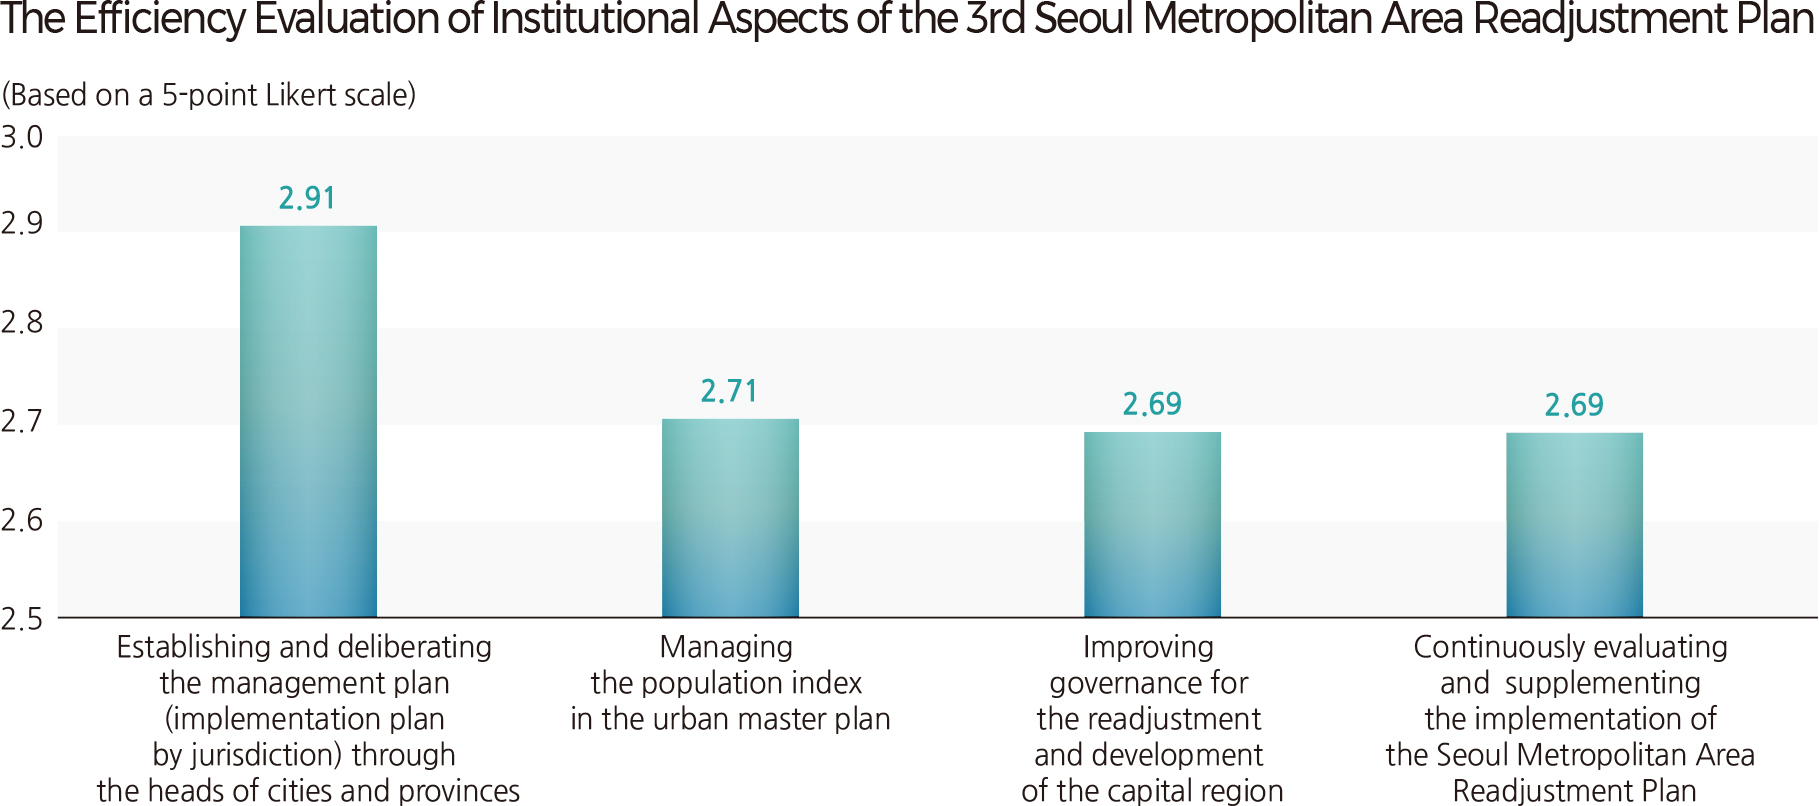 The Efficiency Evaluation of Institutional Aspects of the 3rd Seoul Metropolitan Area Readjustment Plan